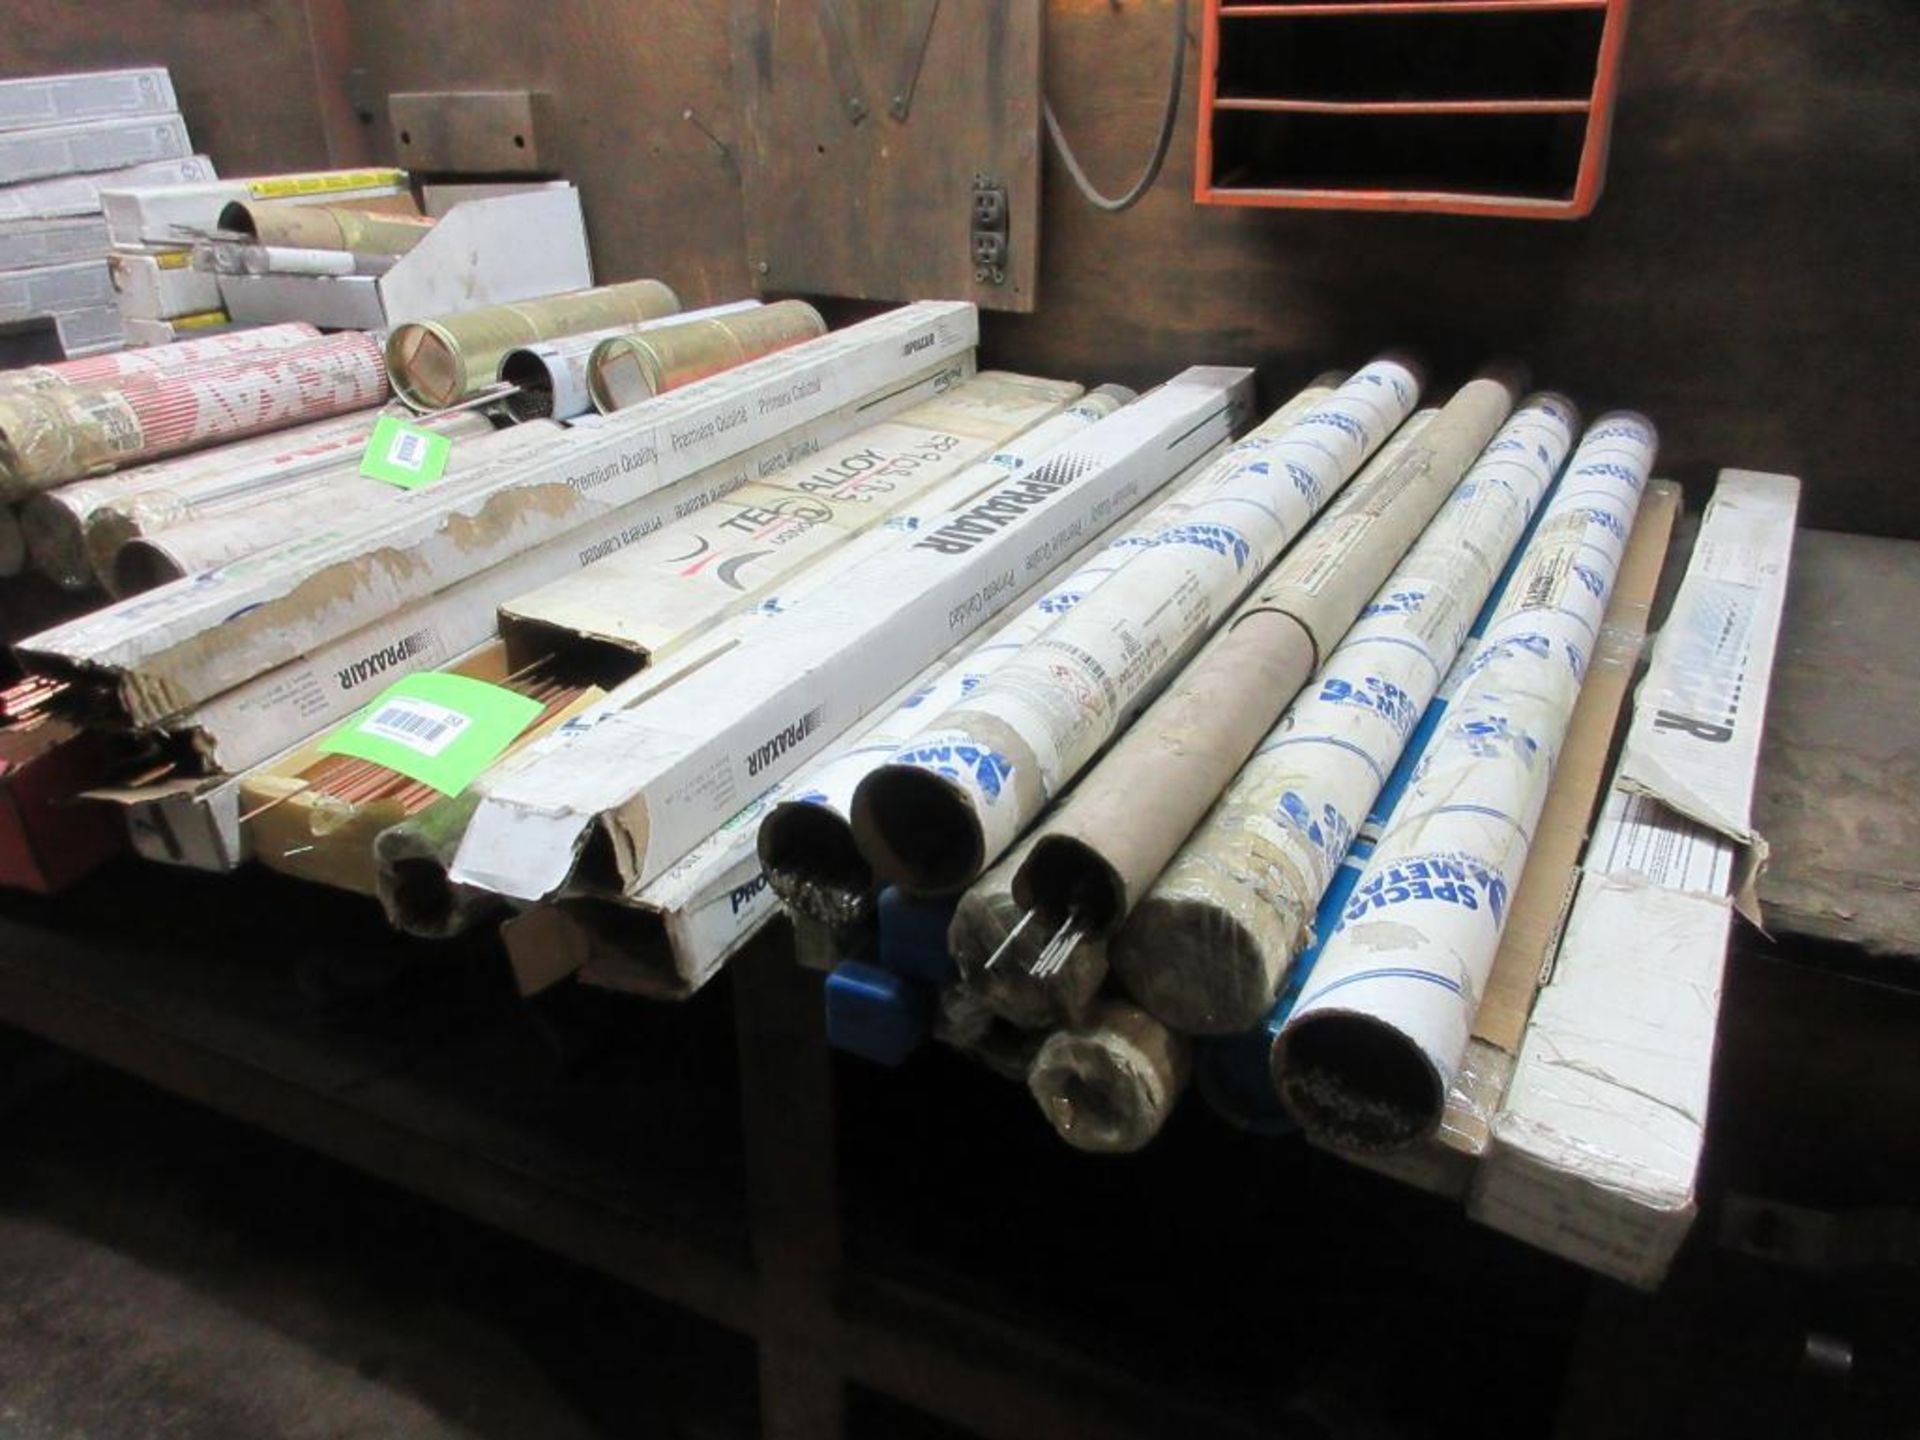 LOT OF 22 CARTONS AND TUBES OF ASSORTED LONGER ELECTRODES (EAST WELDING SHOP) - Image 2 of 2